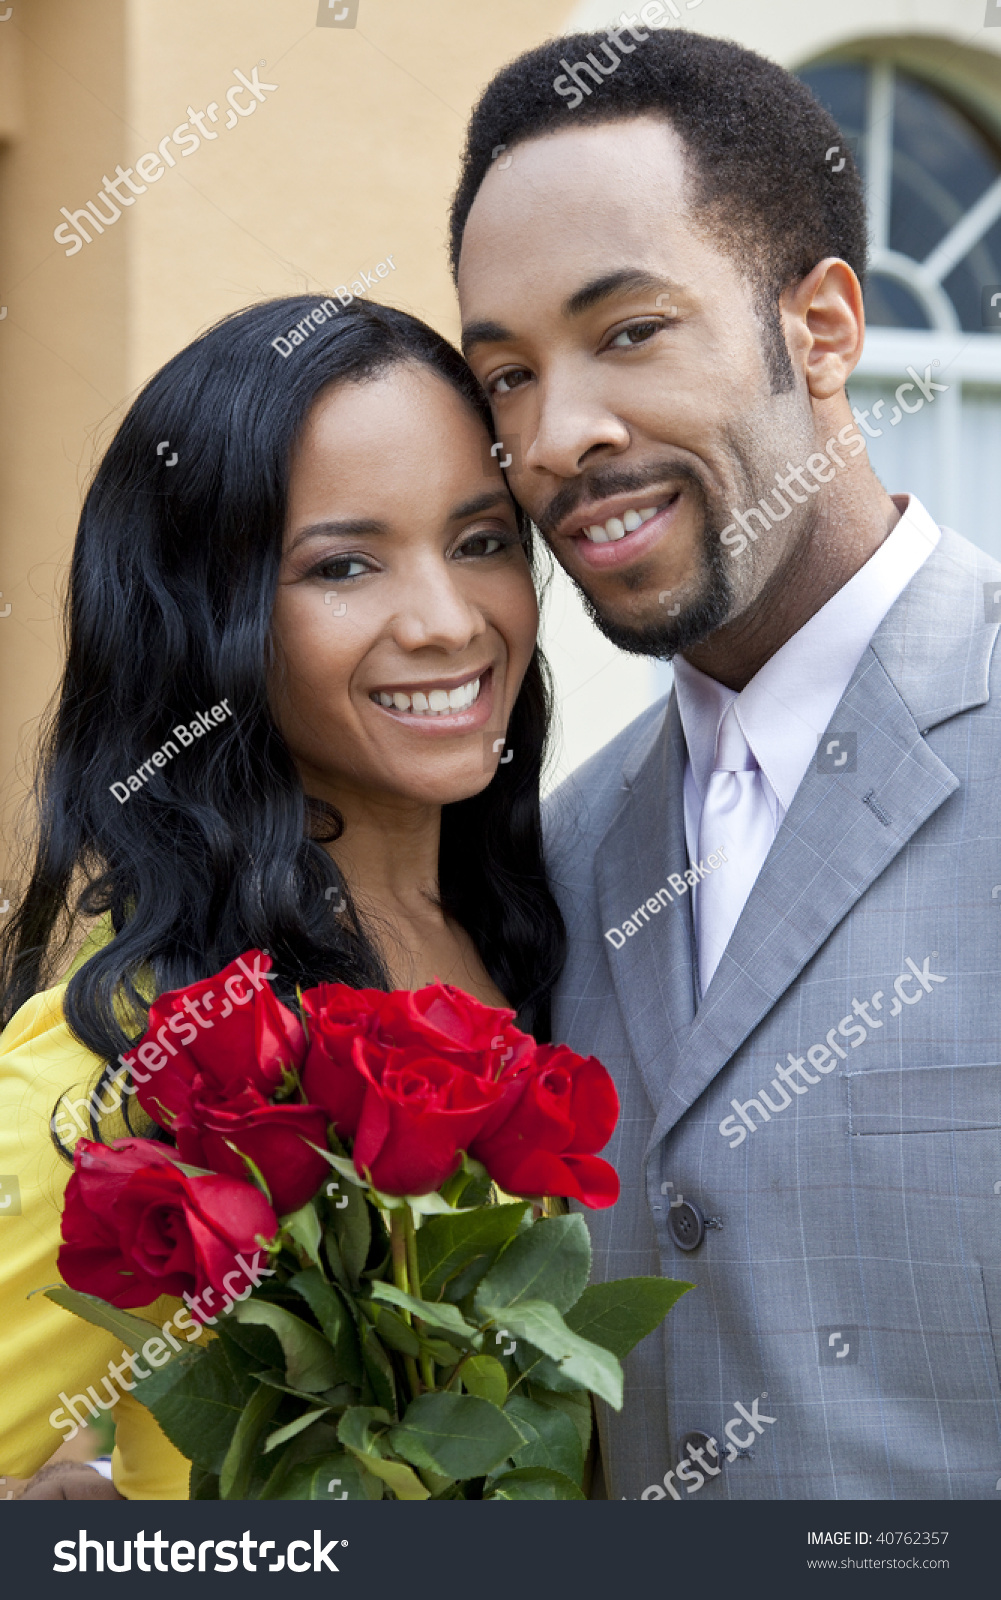 http://image.shutterstock.com/z/stock-photo-a-romantic-and-happy-african-american-man-and-woman-couple-in-their-thirties-smiling-together-with-40762357.jpg